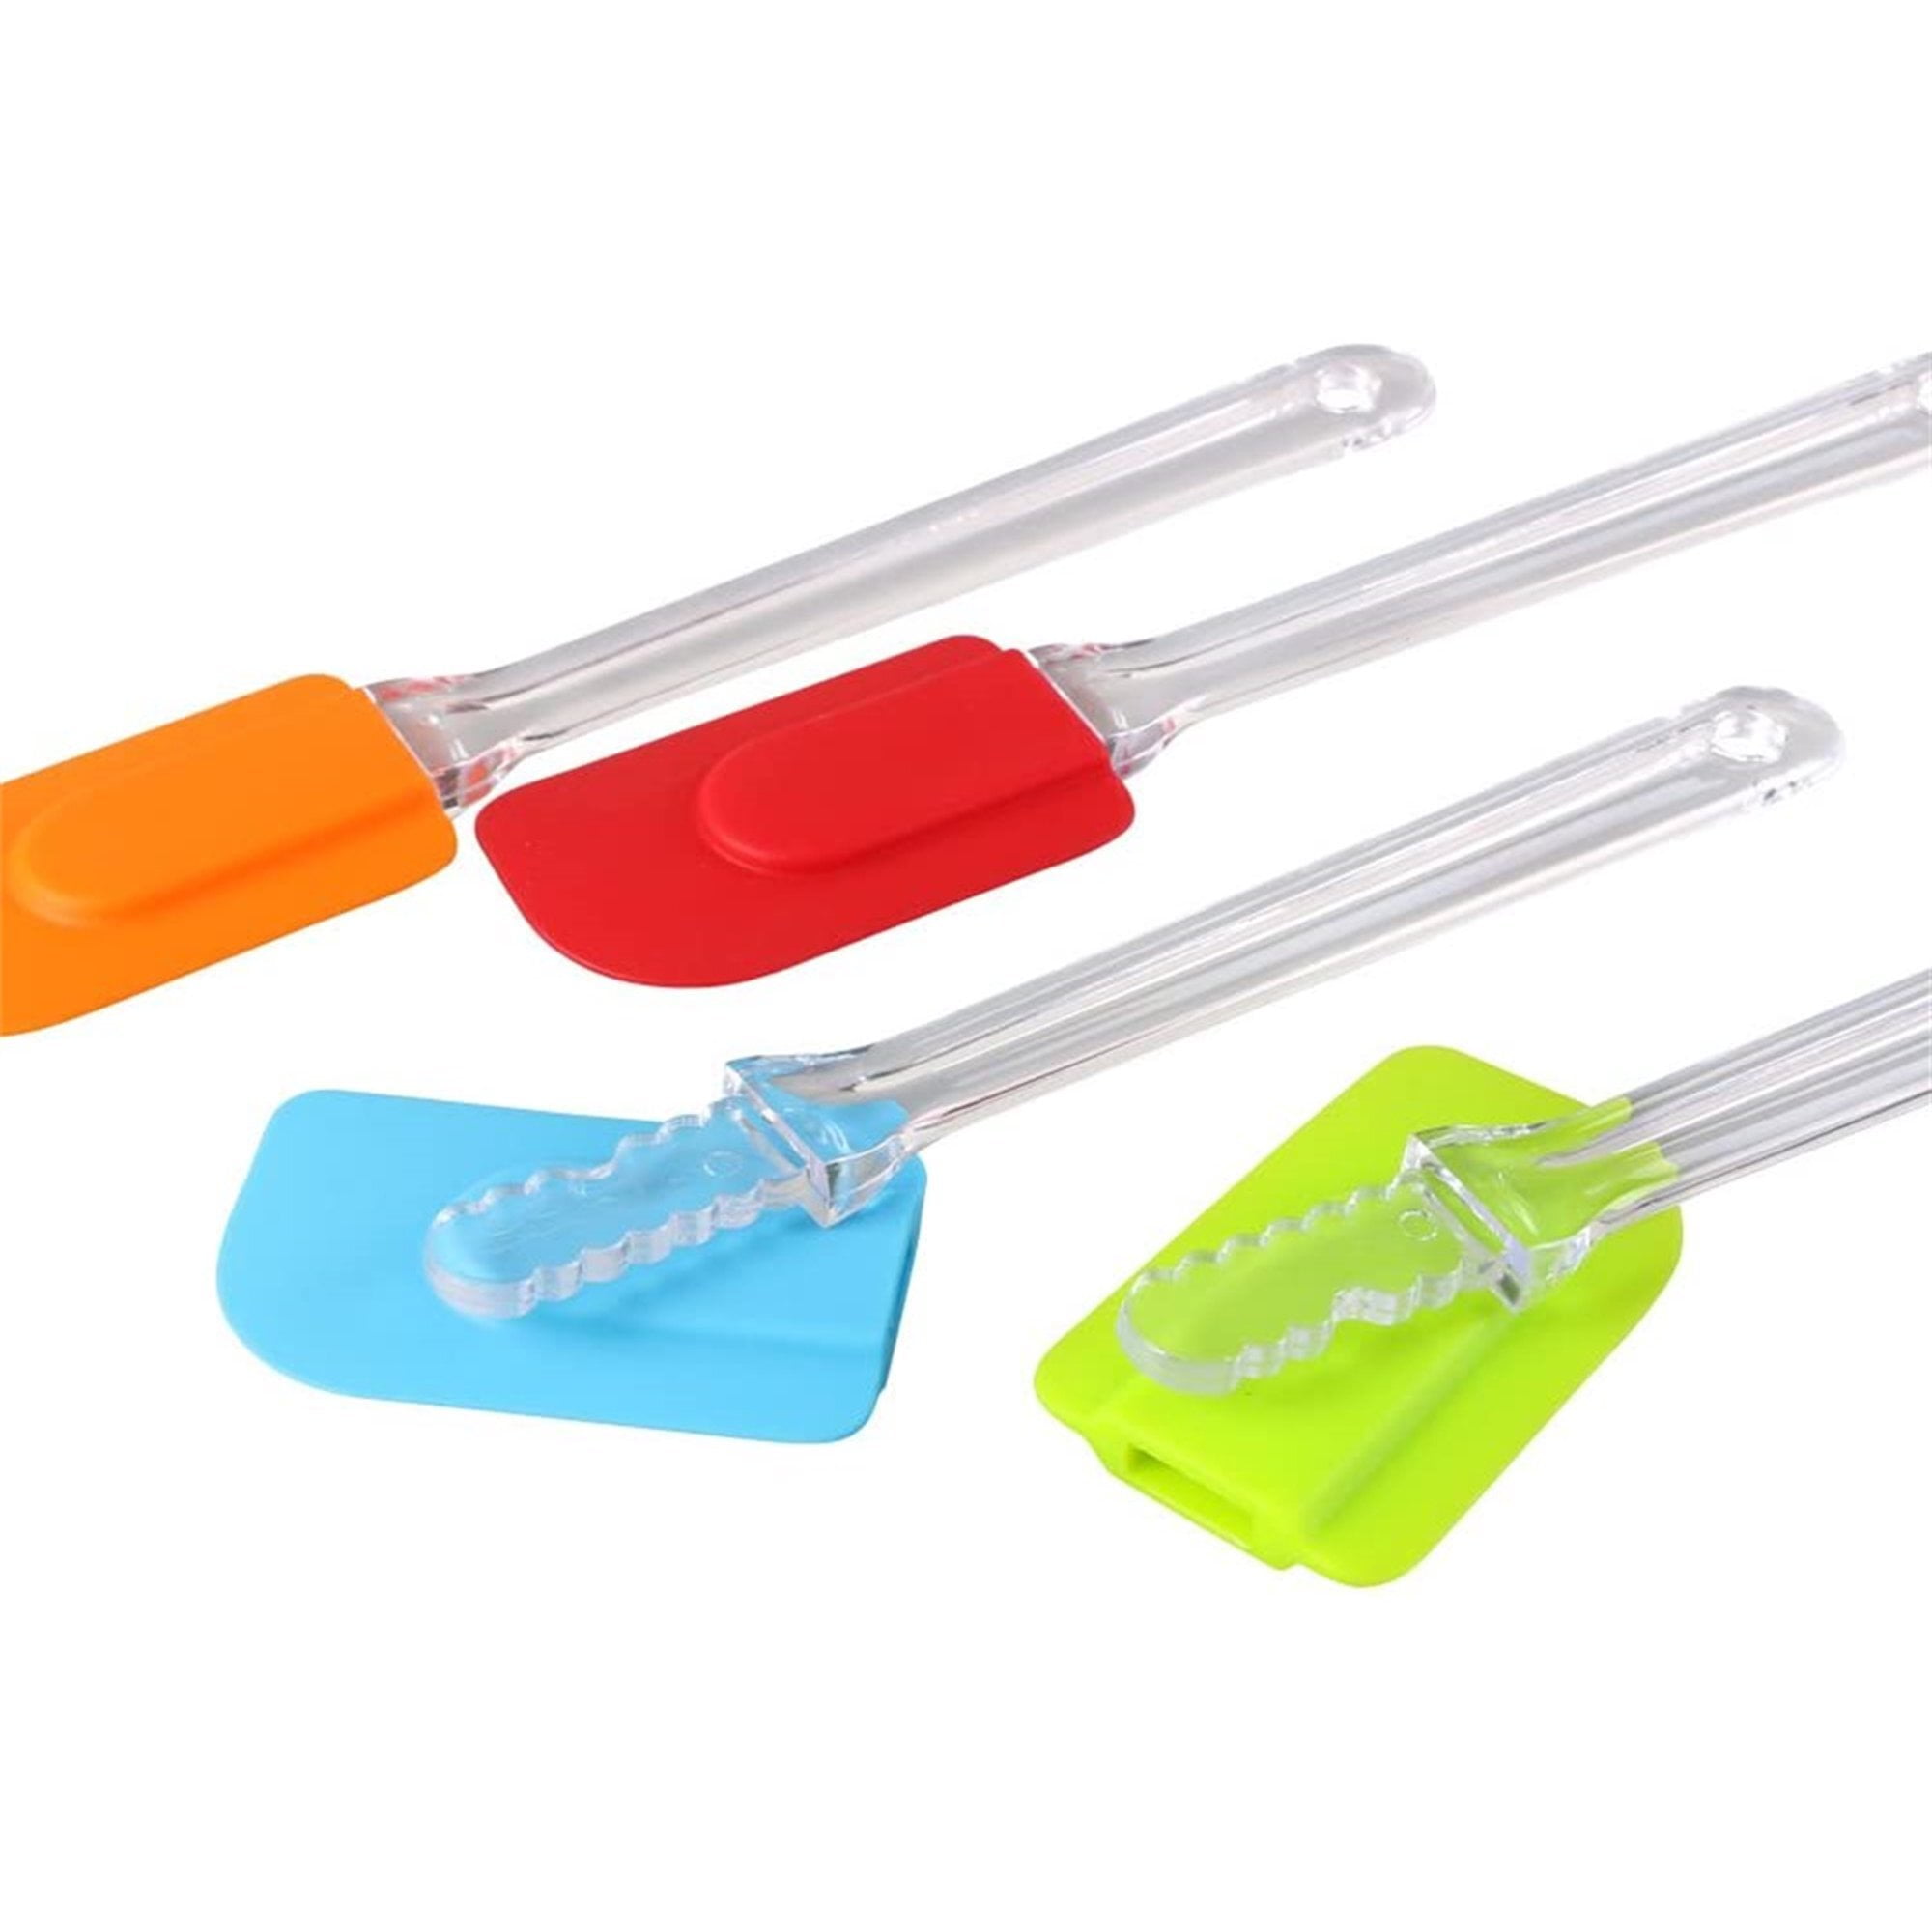 Multicolor Silicone Spatula Set - 446°F Heat Resistant Rubber Spatulas for  Cooking,Baking,Mixing.One…See more Multicolor Silicone Spatula Set - 446°F